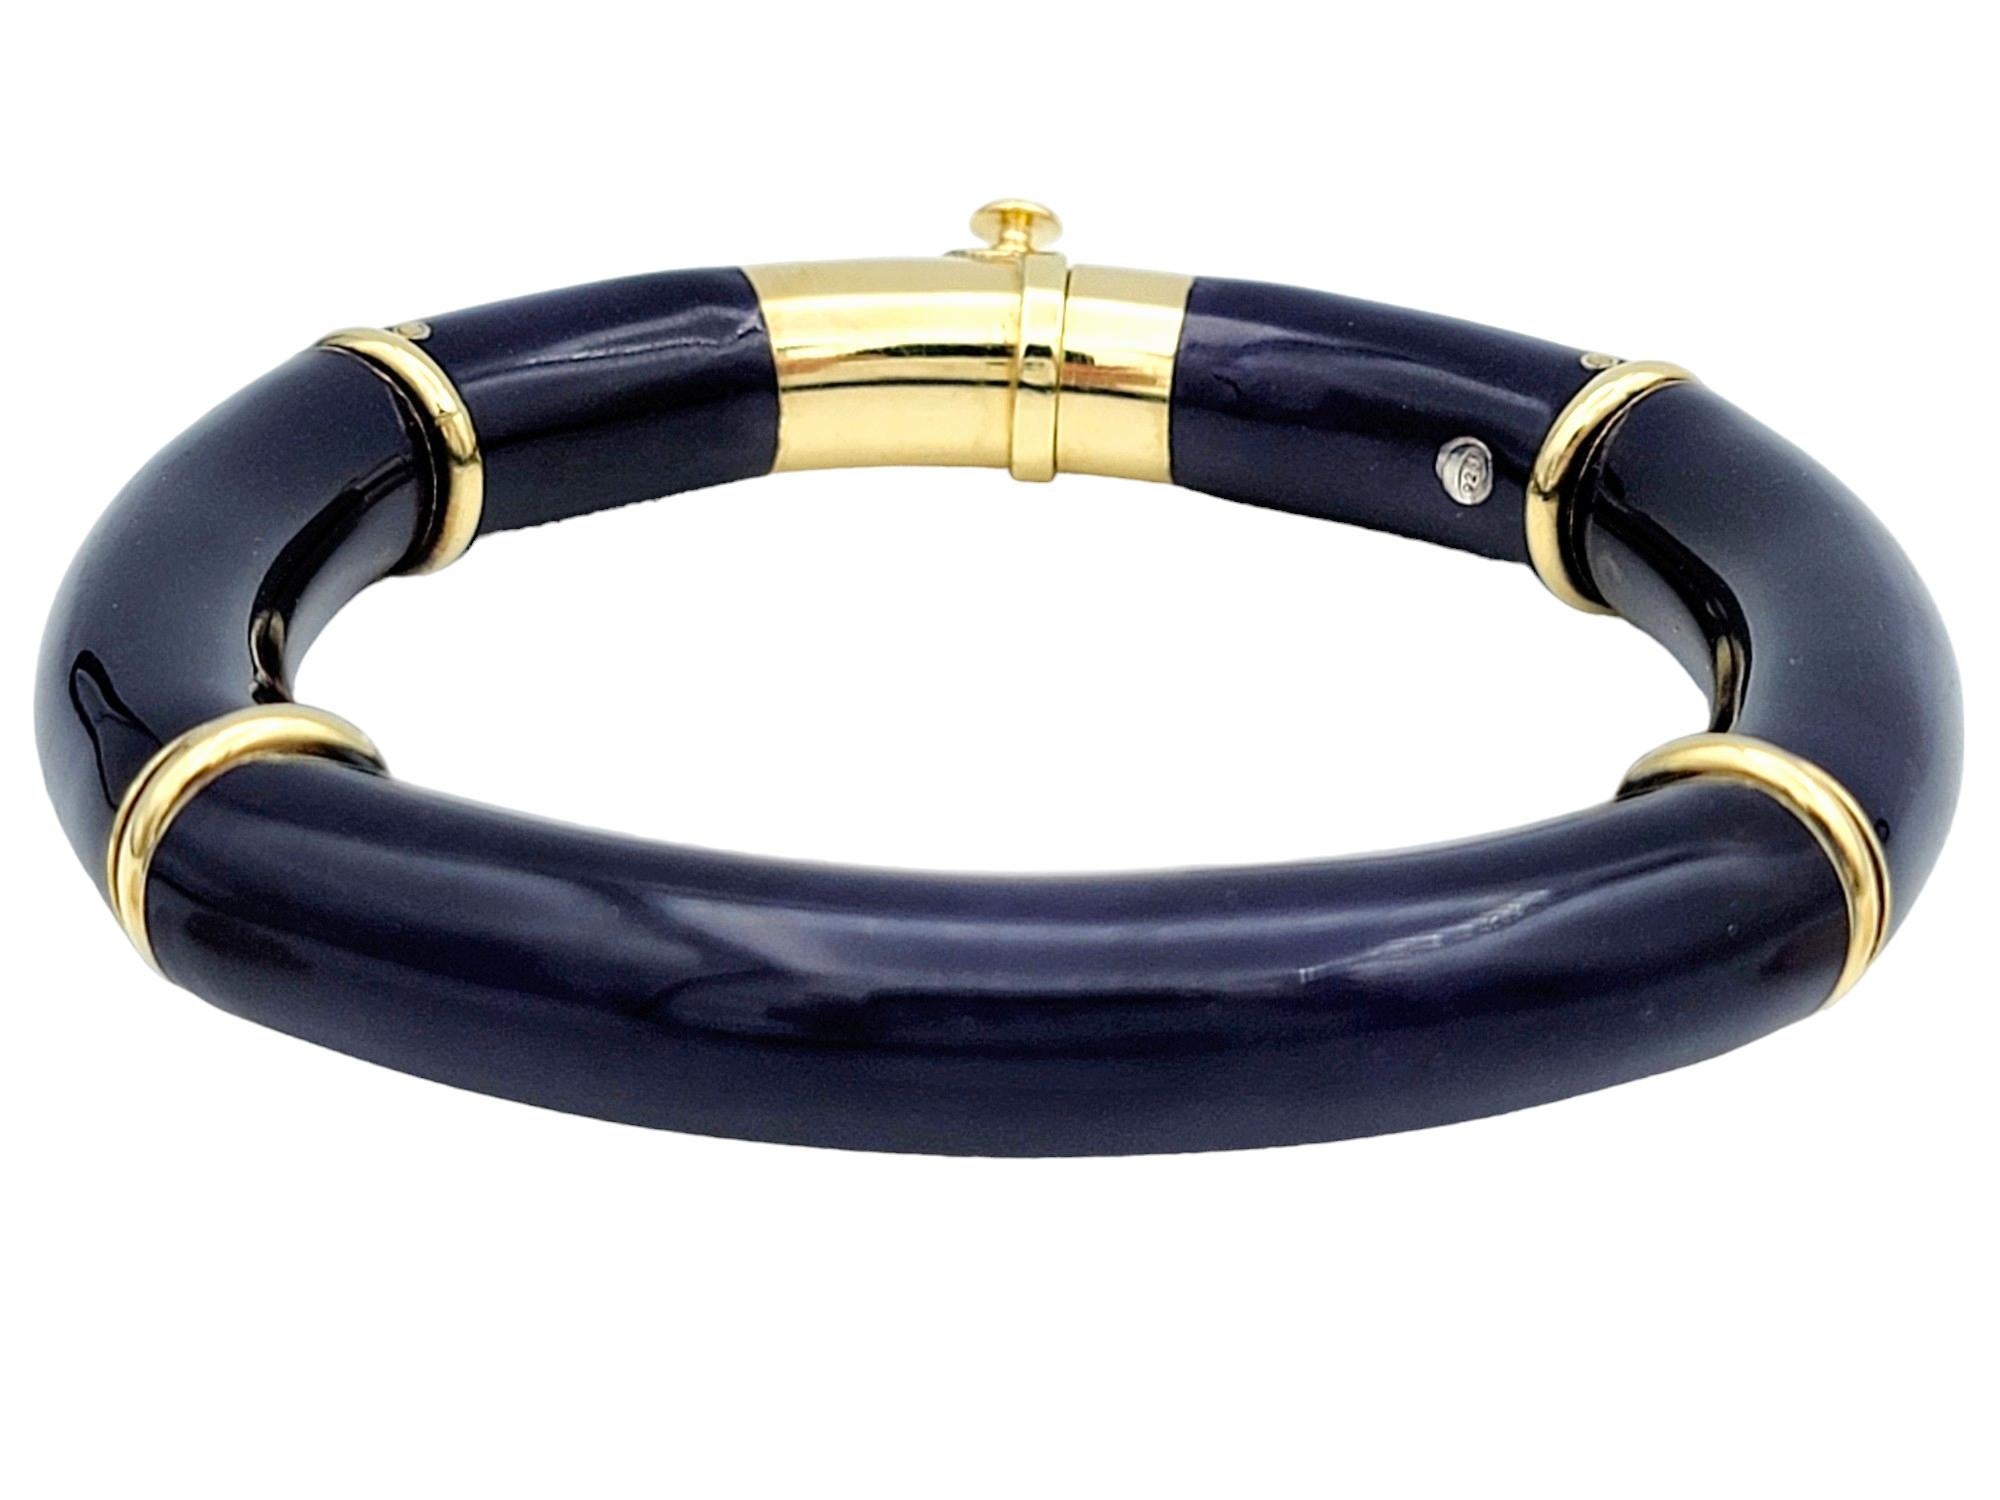 This beautiful La Nouvelle Bague flex bangle is a stunning piece of jewelry that seamlessly combines elegance with contemporary style. Crafted from 18 karat yellow gold, this bangle exudes luxury and sophistication. Its flexible design allows for